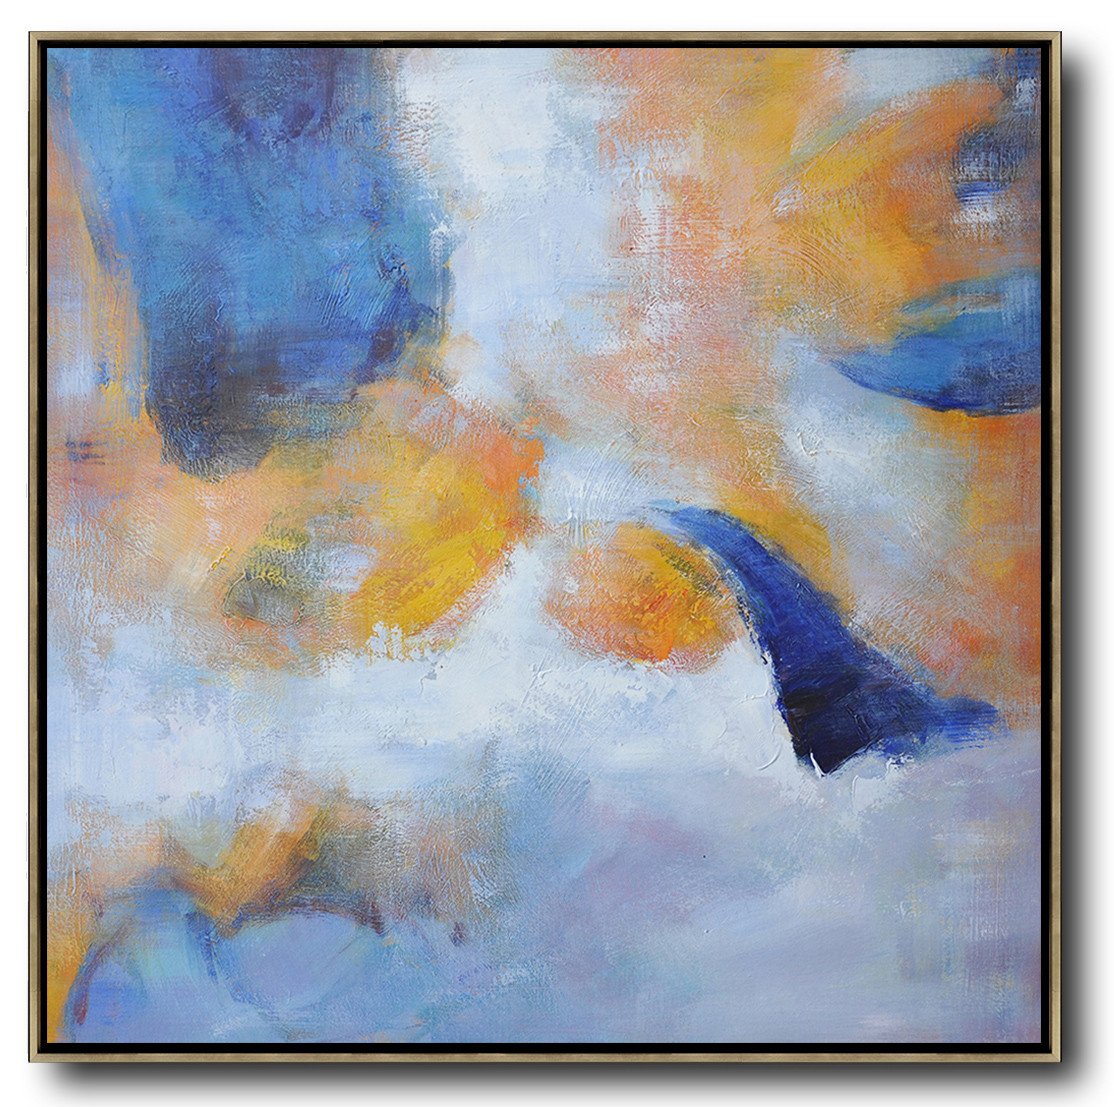 Hand-painted oversized Square Abstract Art abstract artwork